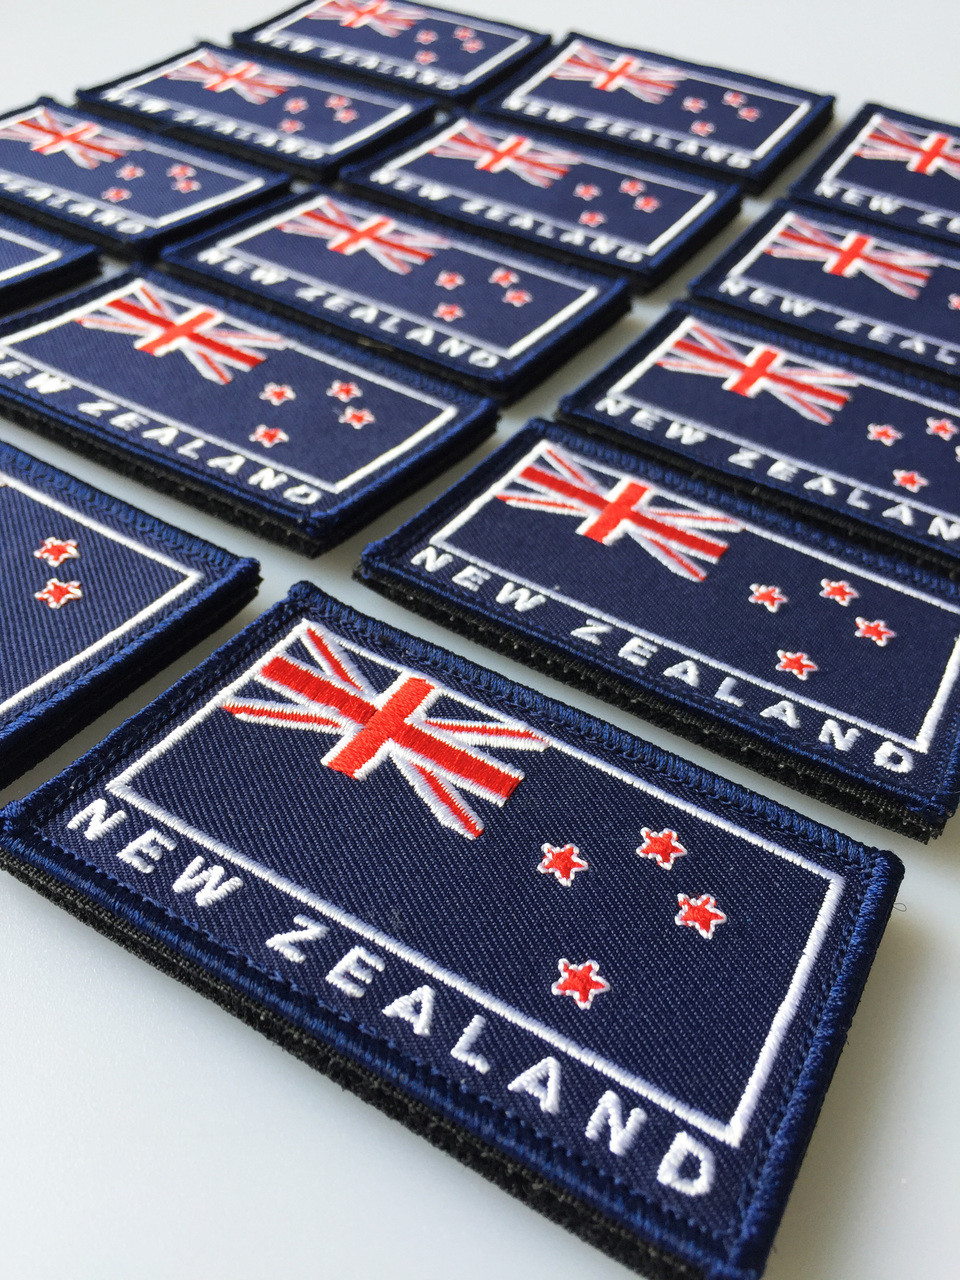 Embroidered New Zealand Flag Patch w/Velcro Backing Original